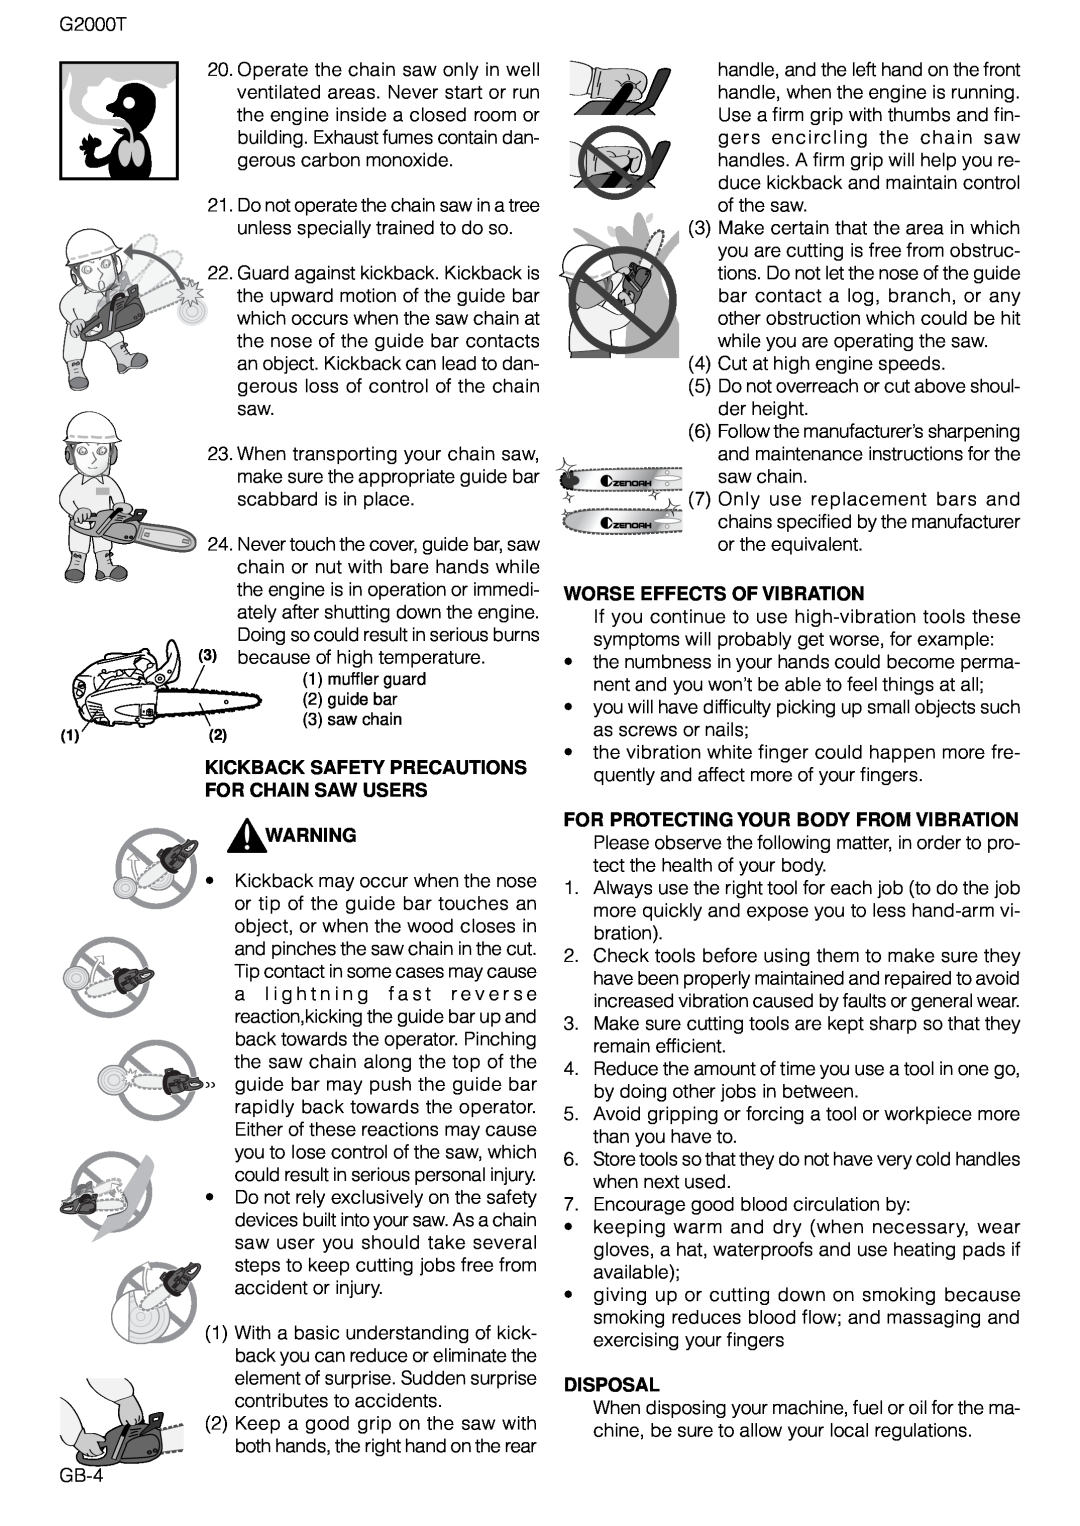 Zenoah G2000T owner manual Kickback Safety Precautions, For Chain Saw Users, Worse Effects Of Vibration, Disposal 